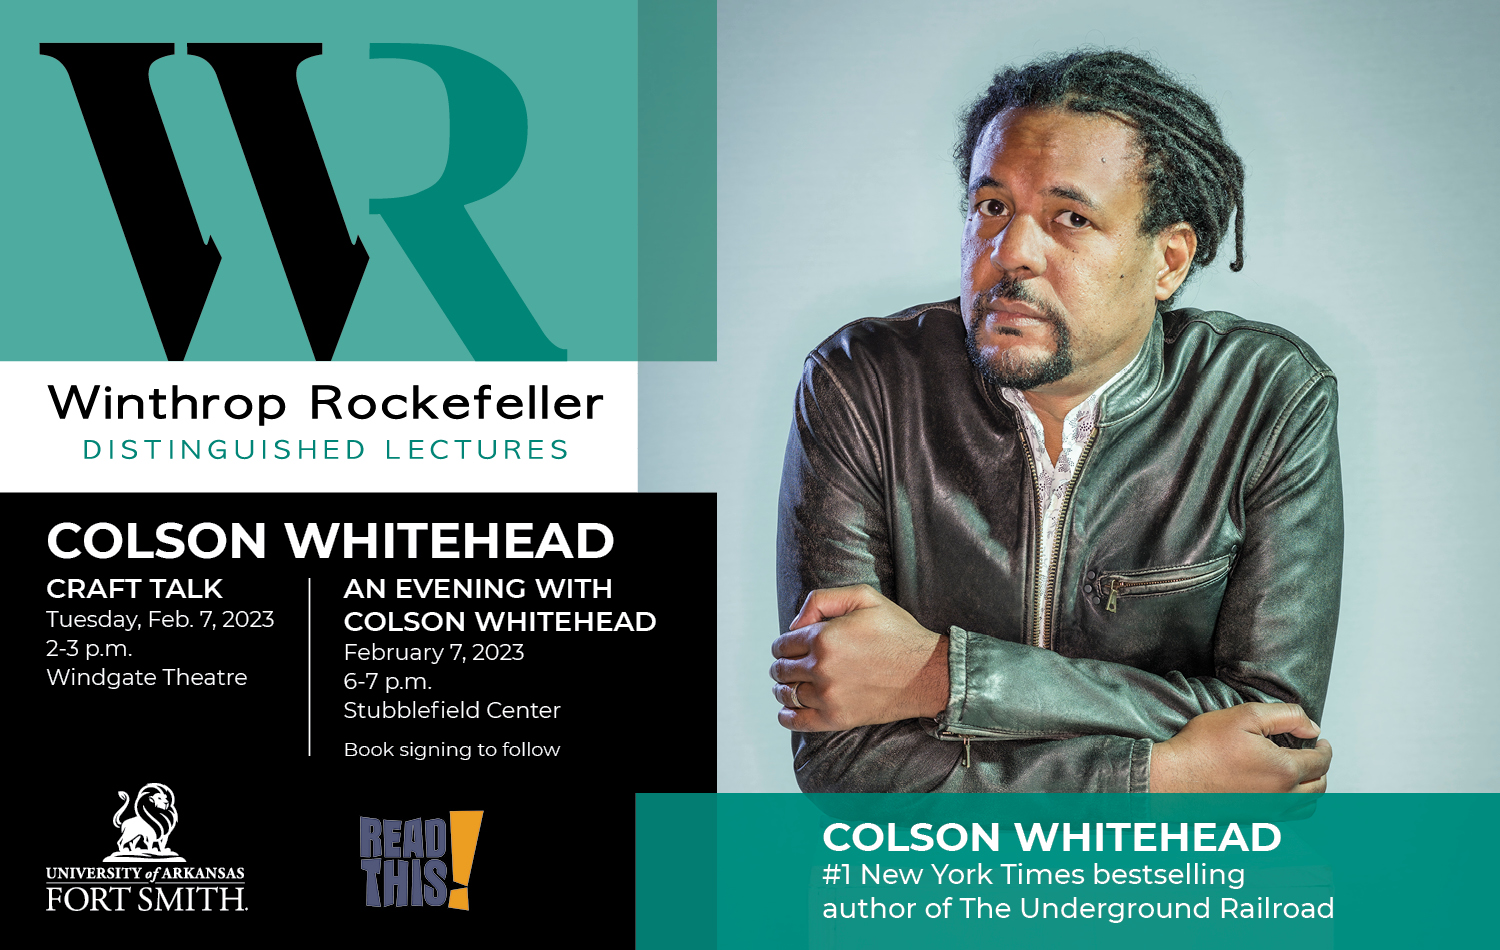 An Evening with Colson Whitehead 